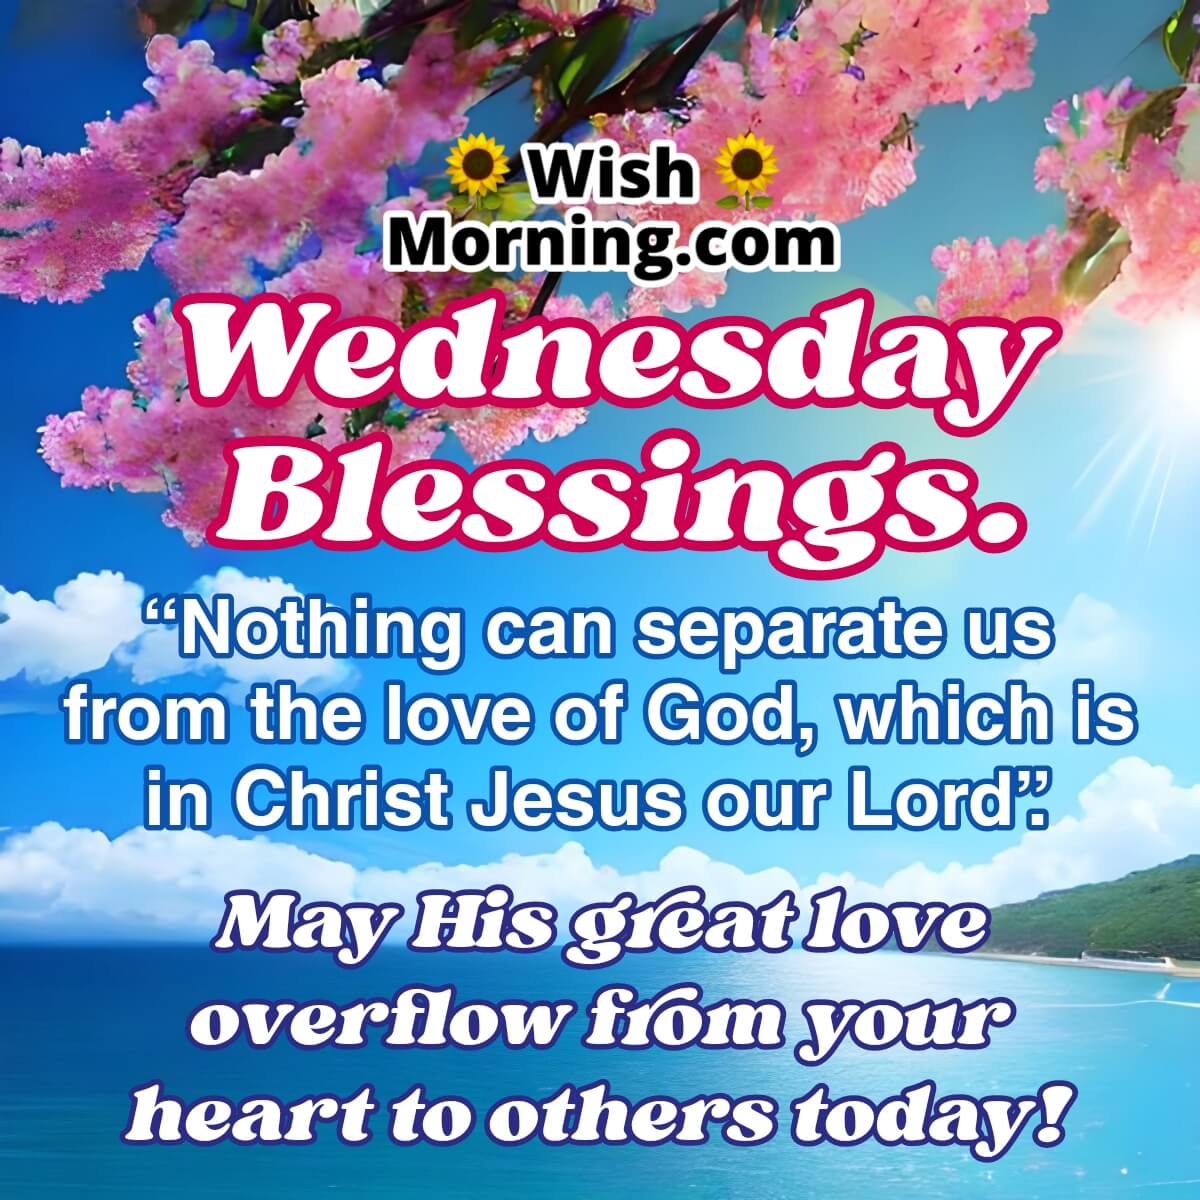 Wednesday Blessings Picture